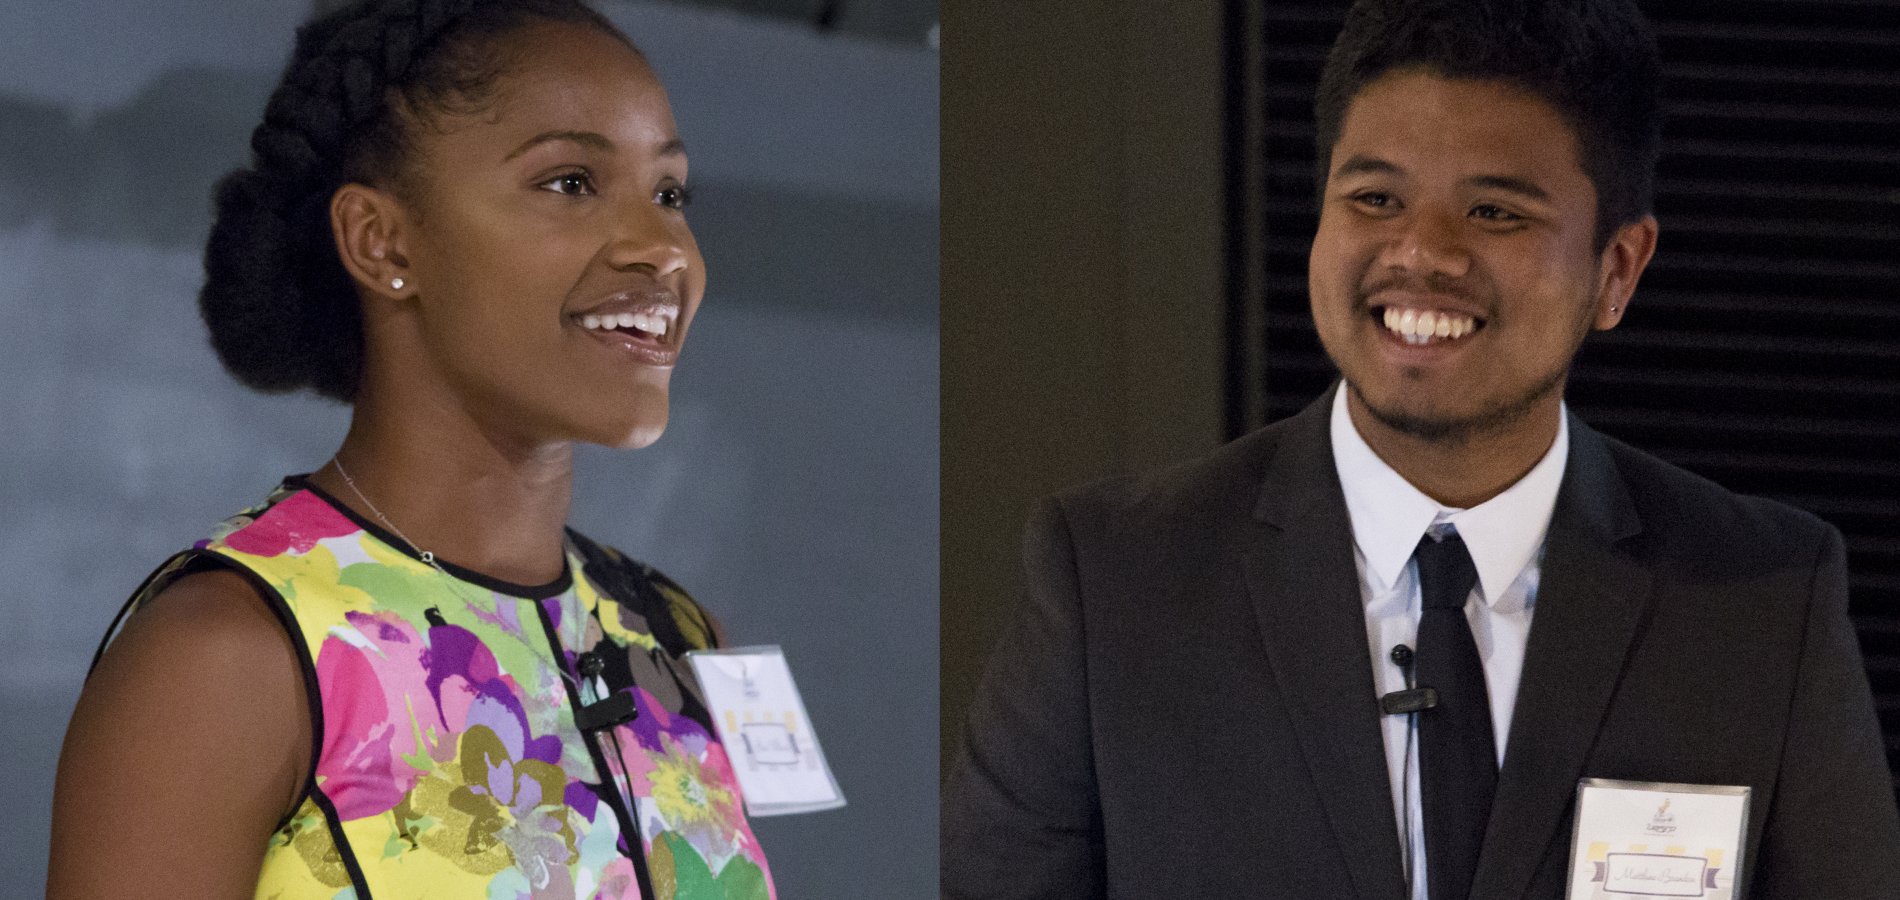 Akua Williams '18 a Public Policy Major, and Matthew Brandon '19, a Computer Science Major presented their research as part of the CSTEP